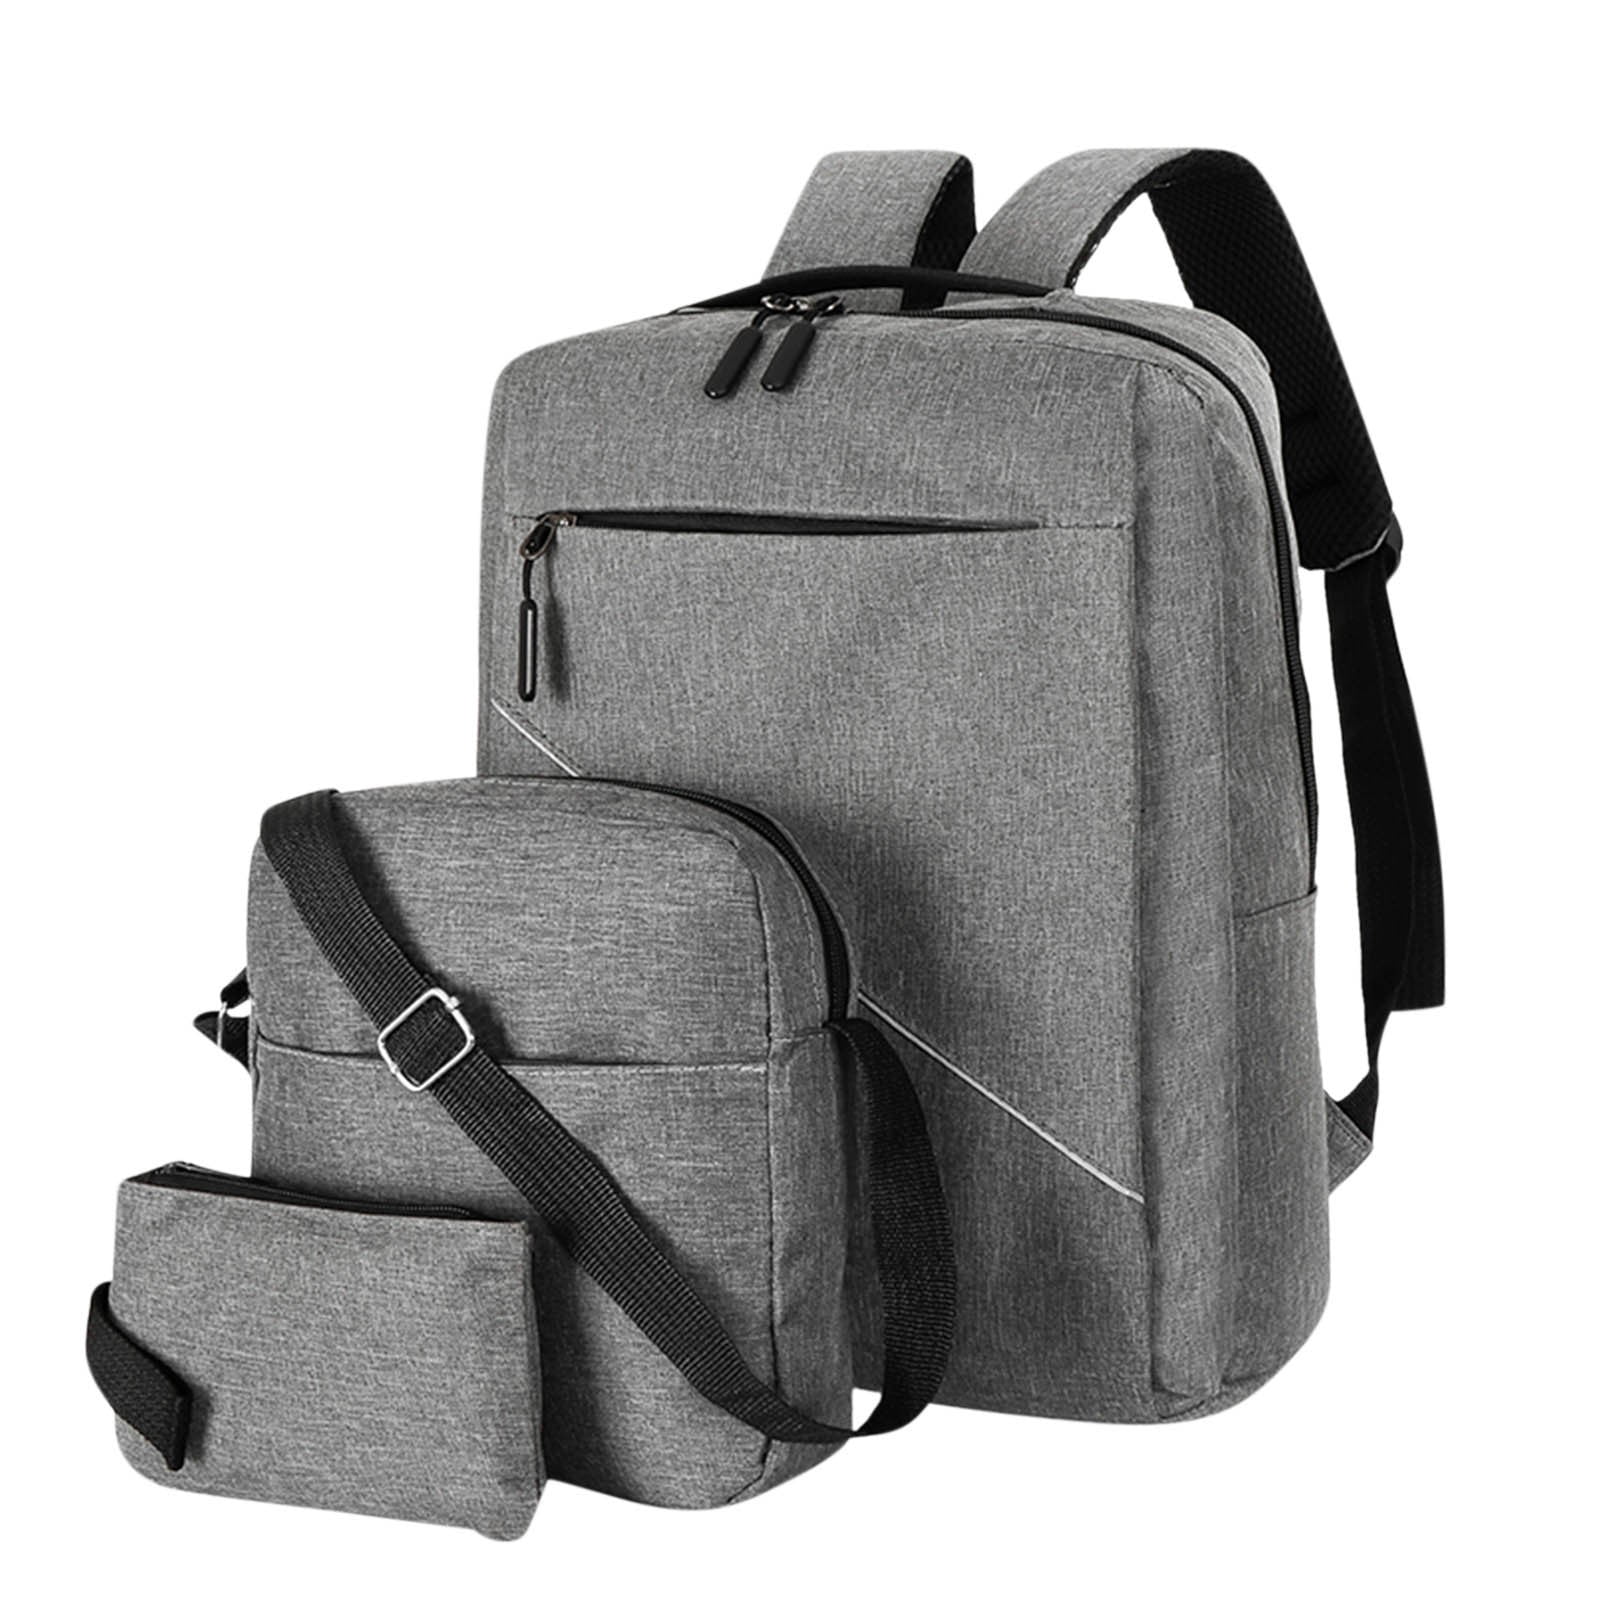 AnuirheiH Laptop Backpack Set 3 15 6Inch Water Resistant Padded Computer Bag USB Charging Port Study Work Durable Anti Theft College School Students c01f4ffb 2278 4a53 abf4 05a20e9c4fed.79ad8d6141a544a68db545b8dbe5e982